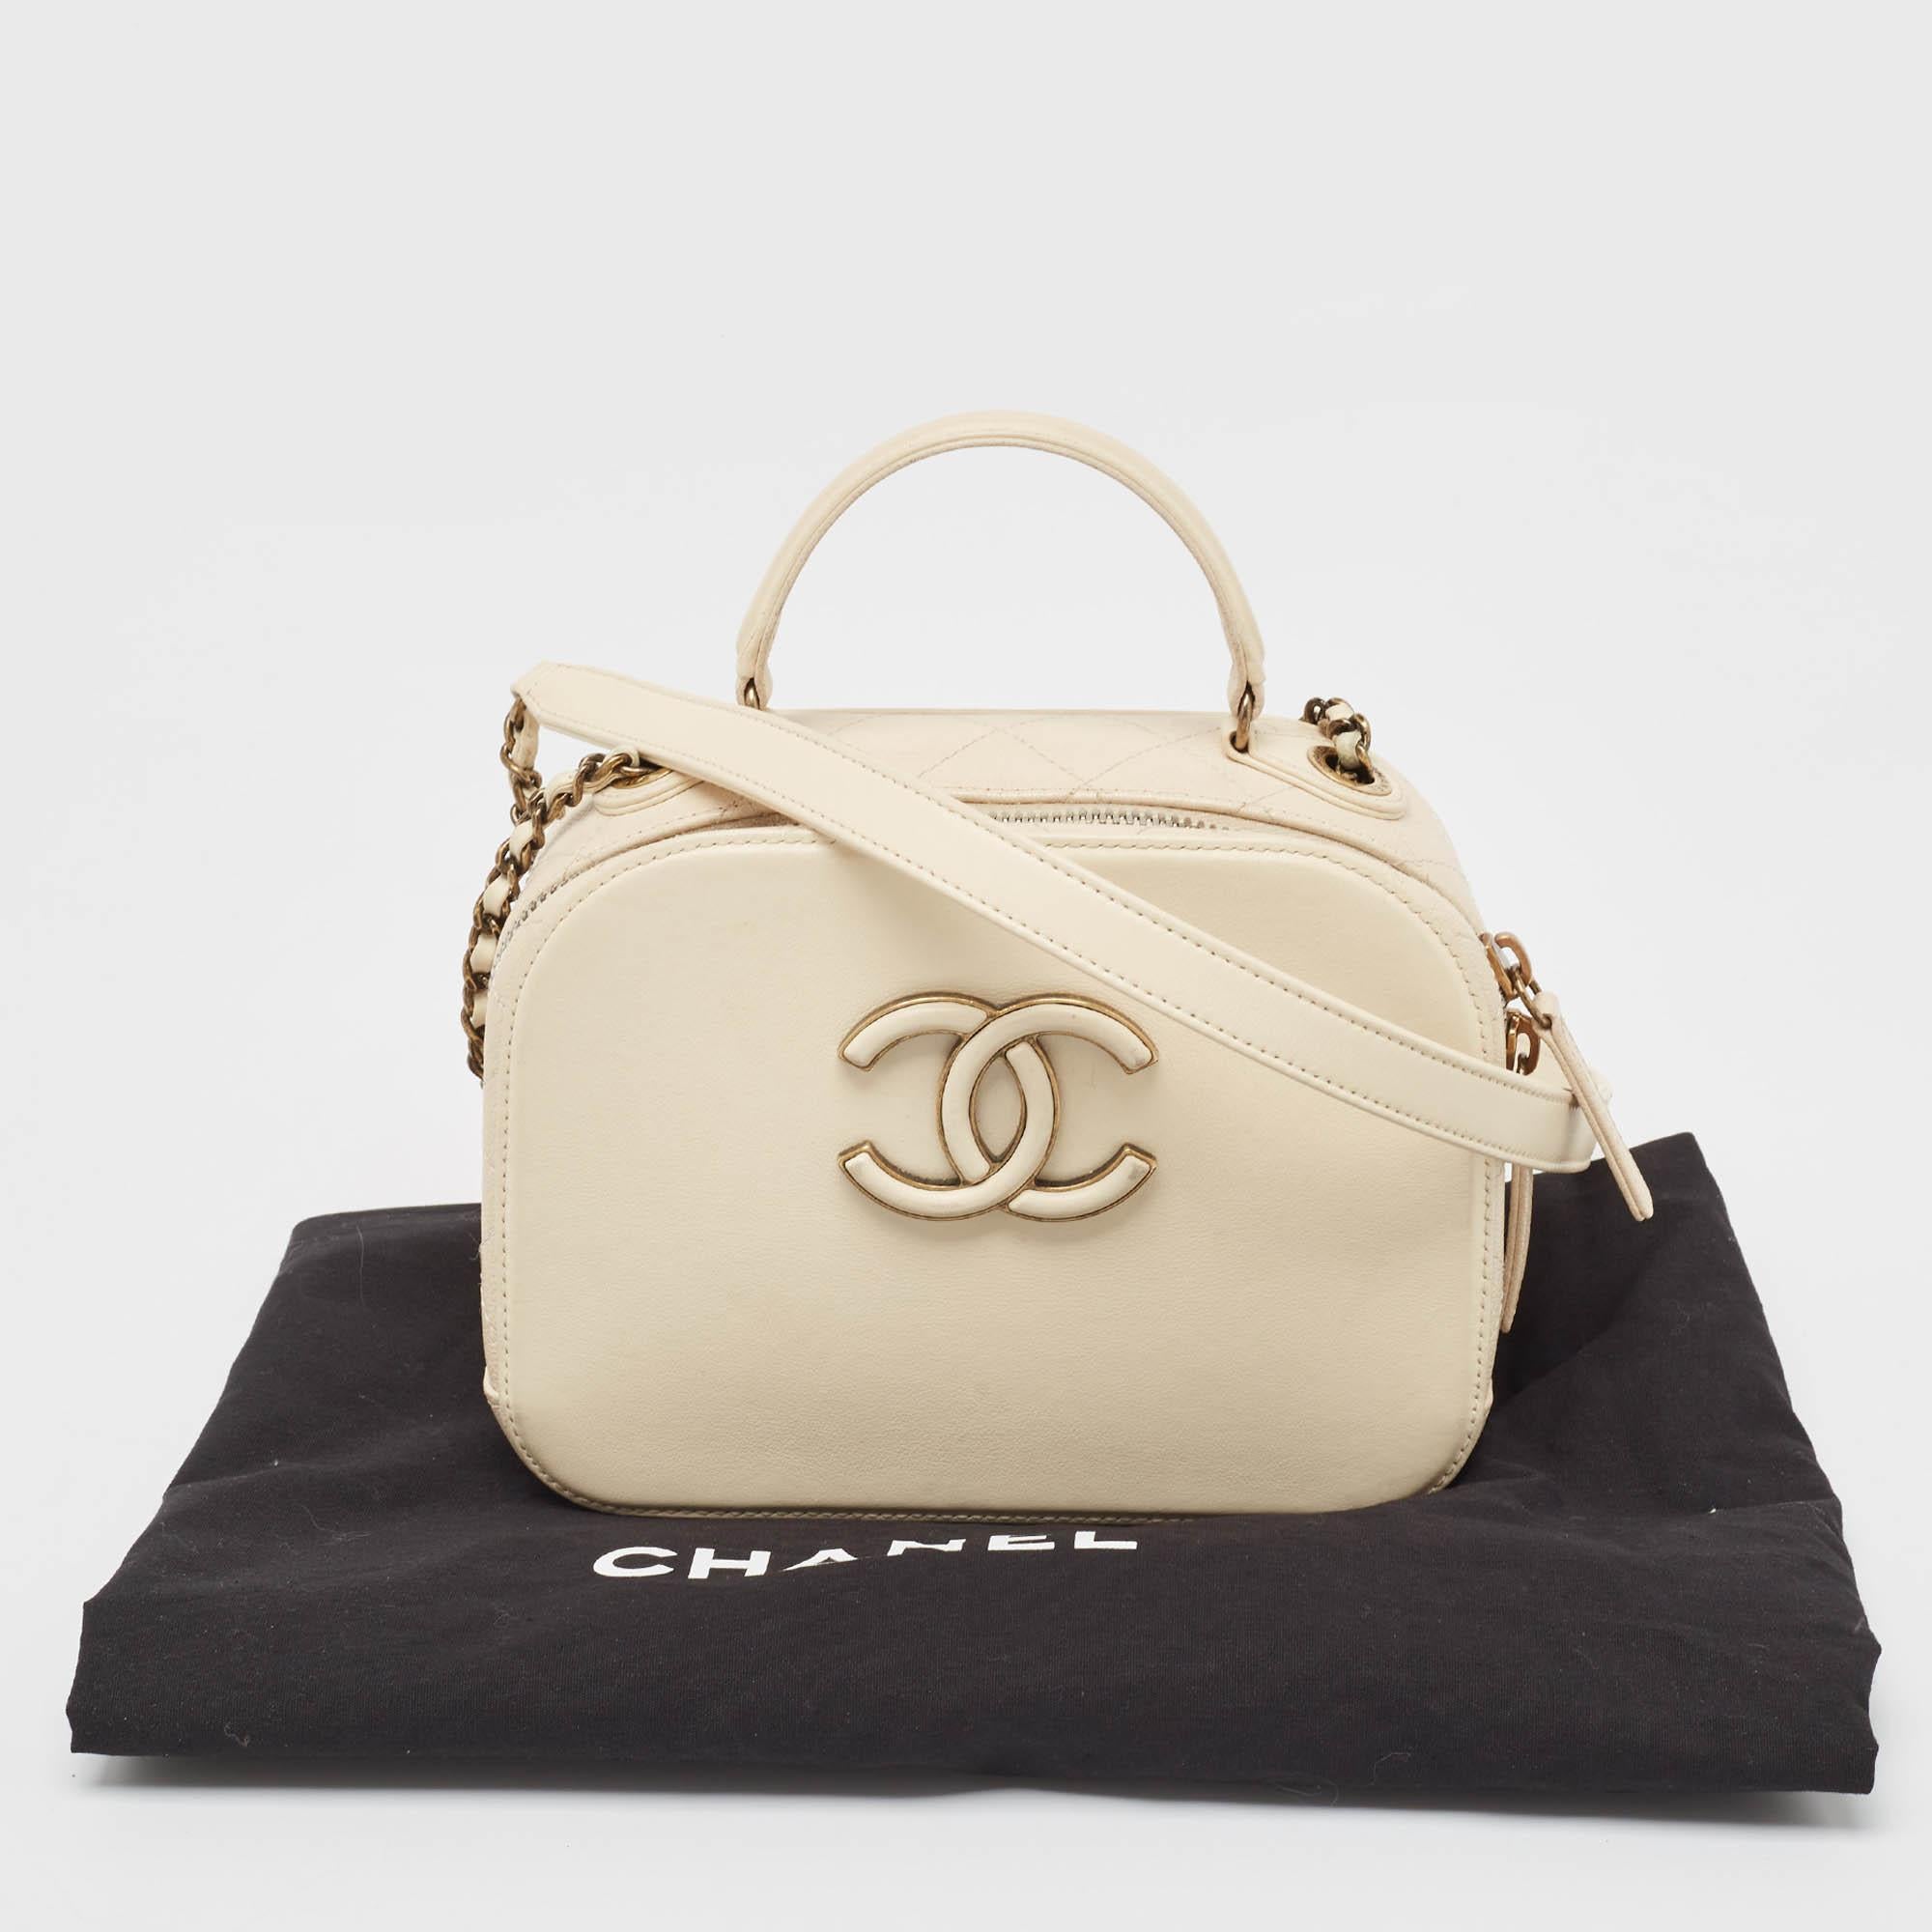 Chanel Off White Quilted Leather Coco Curve Vanity Case Bag 11